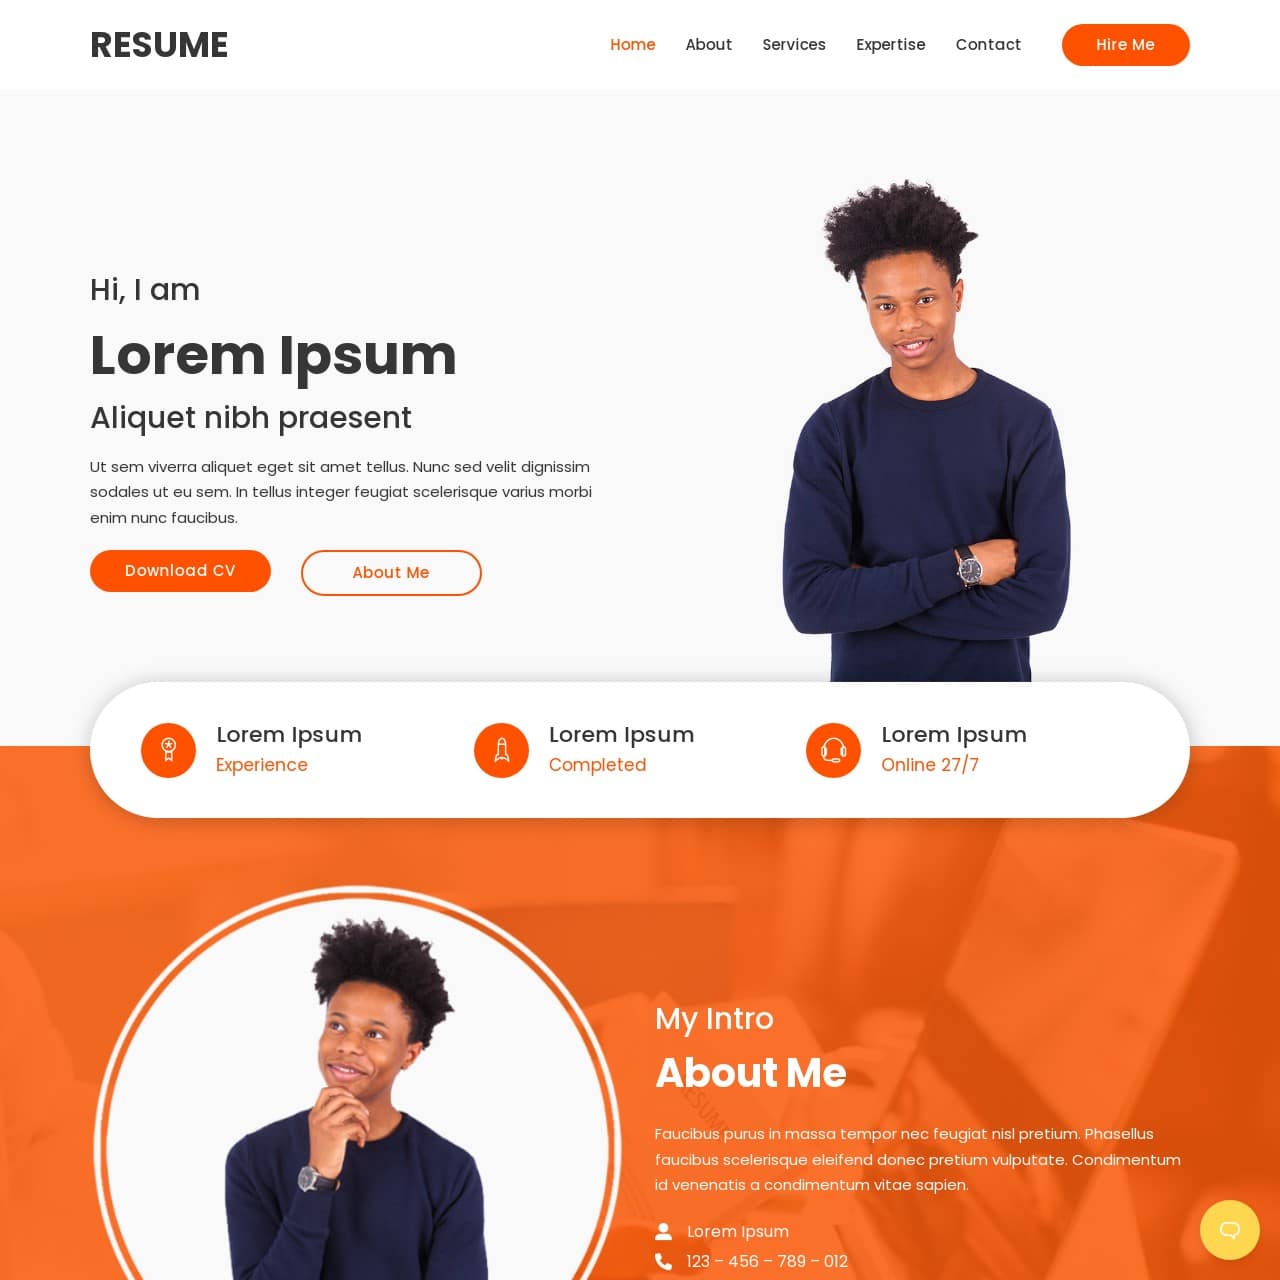 Resume Template - Home Page